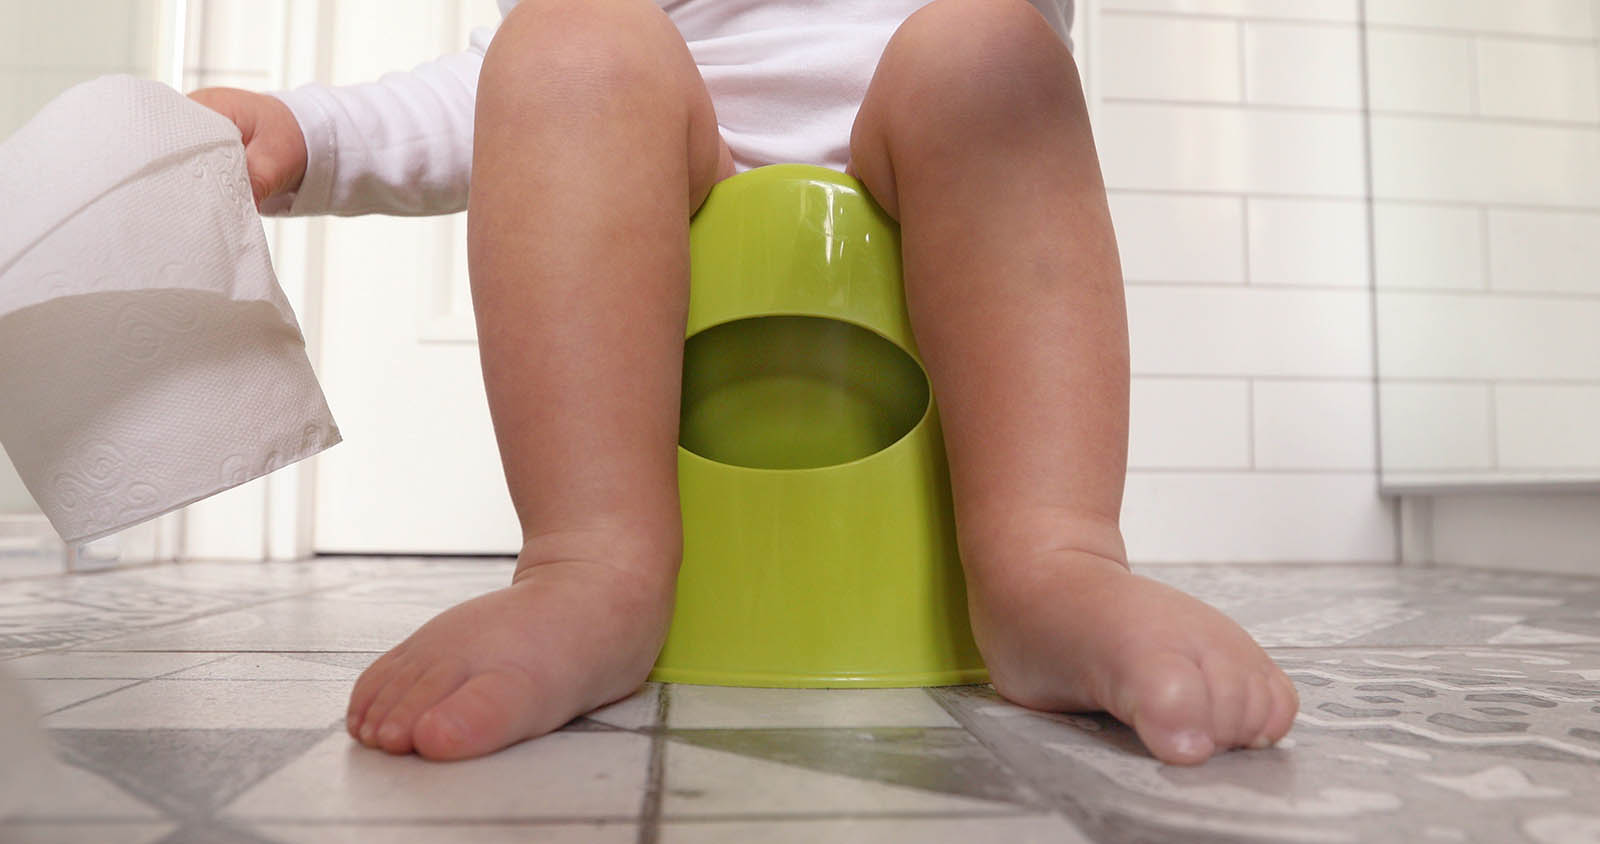 Image of child's feet on a potty 